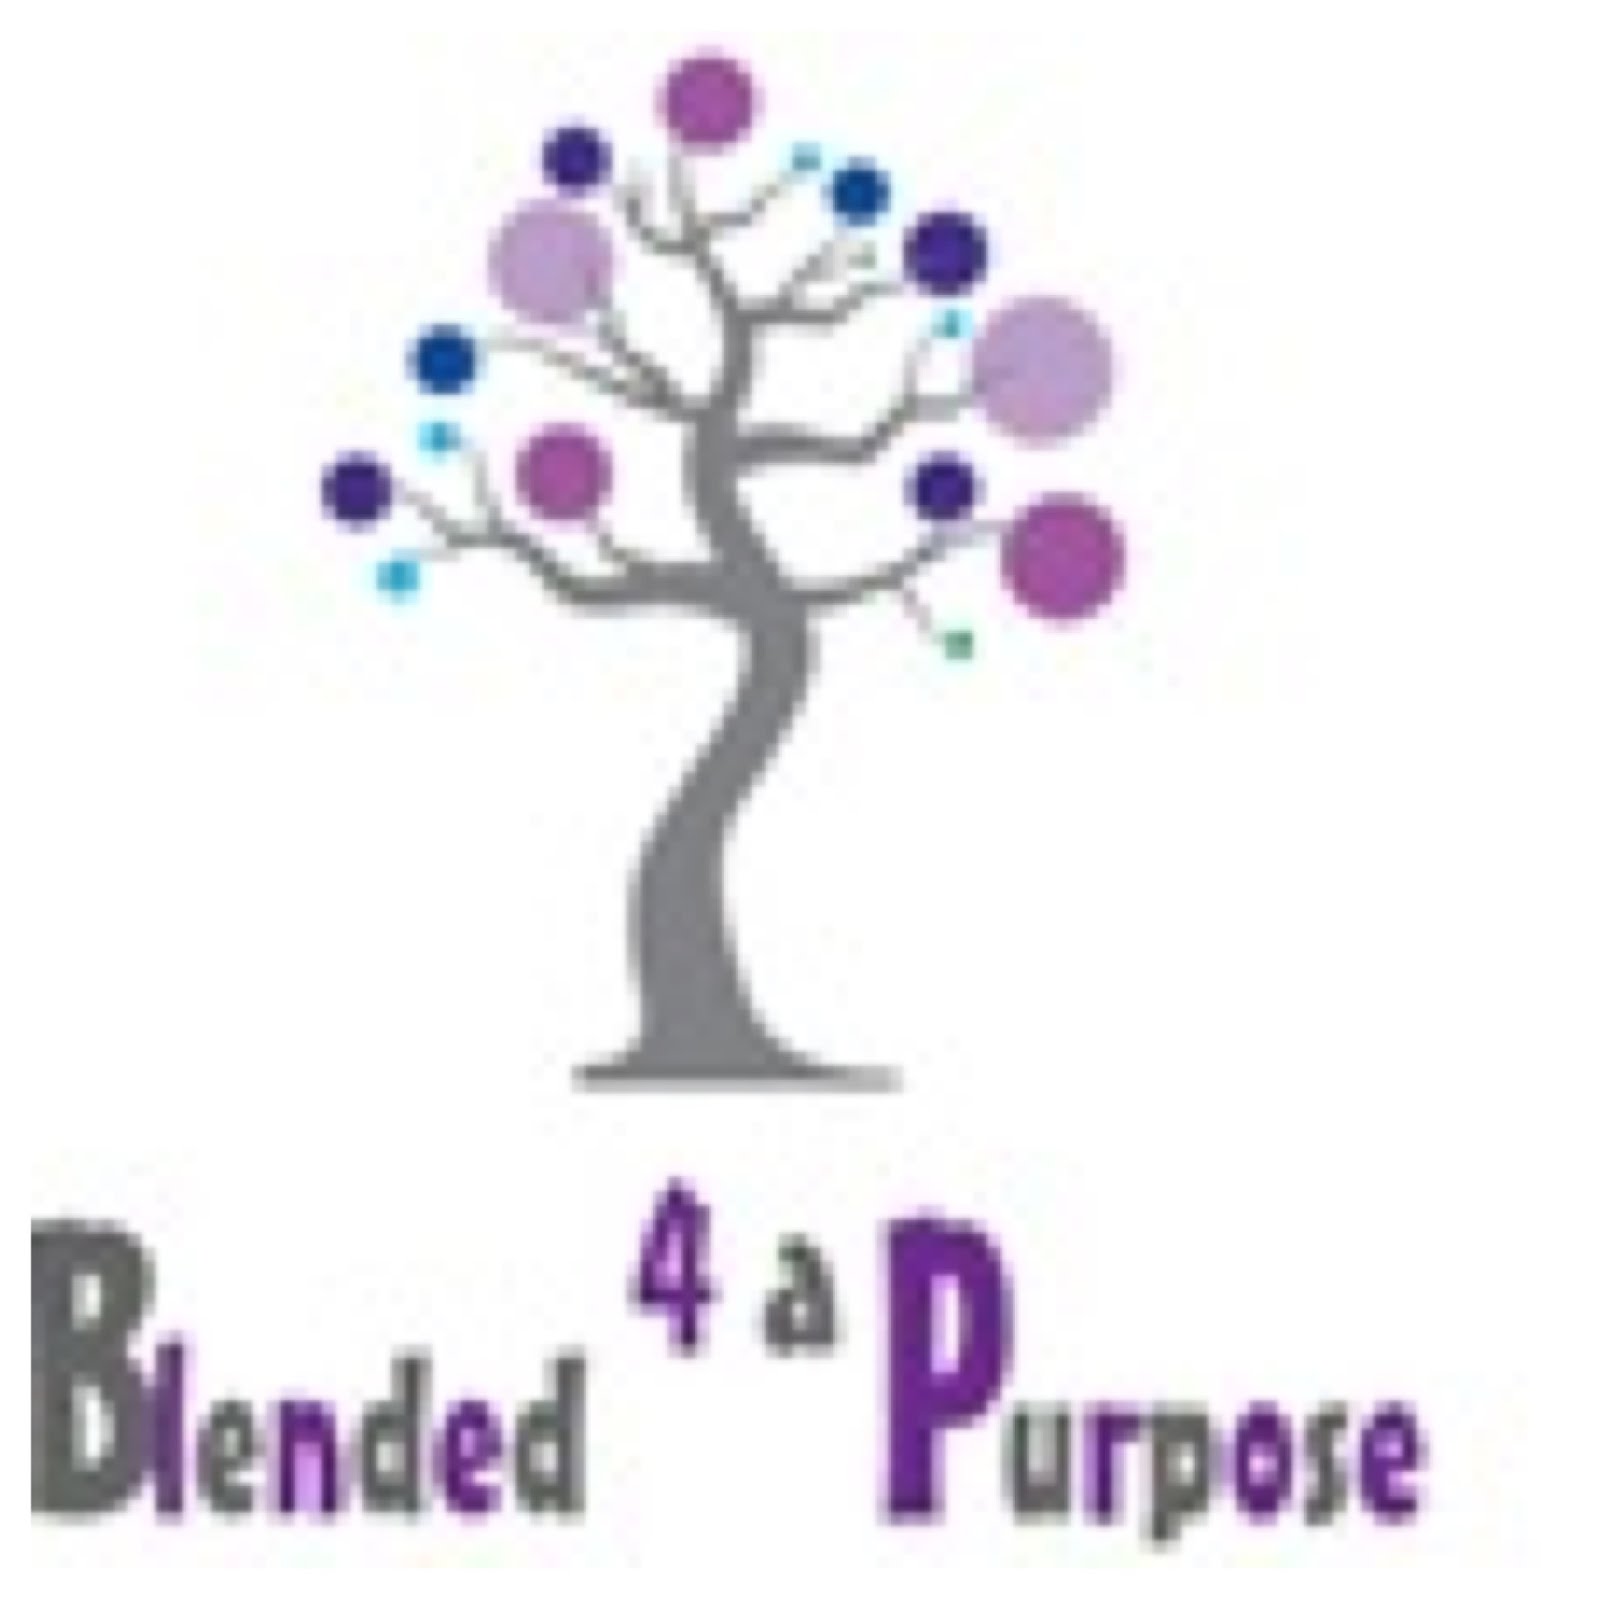 Blended 4 a Purpose